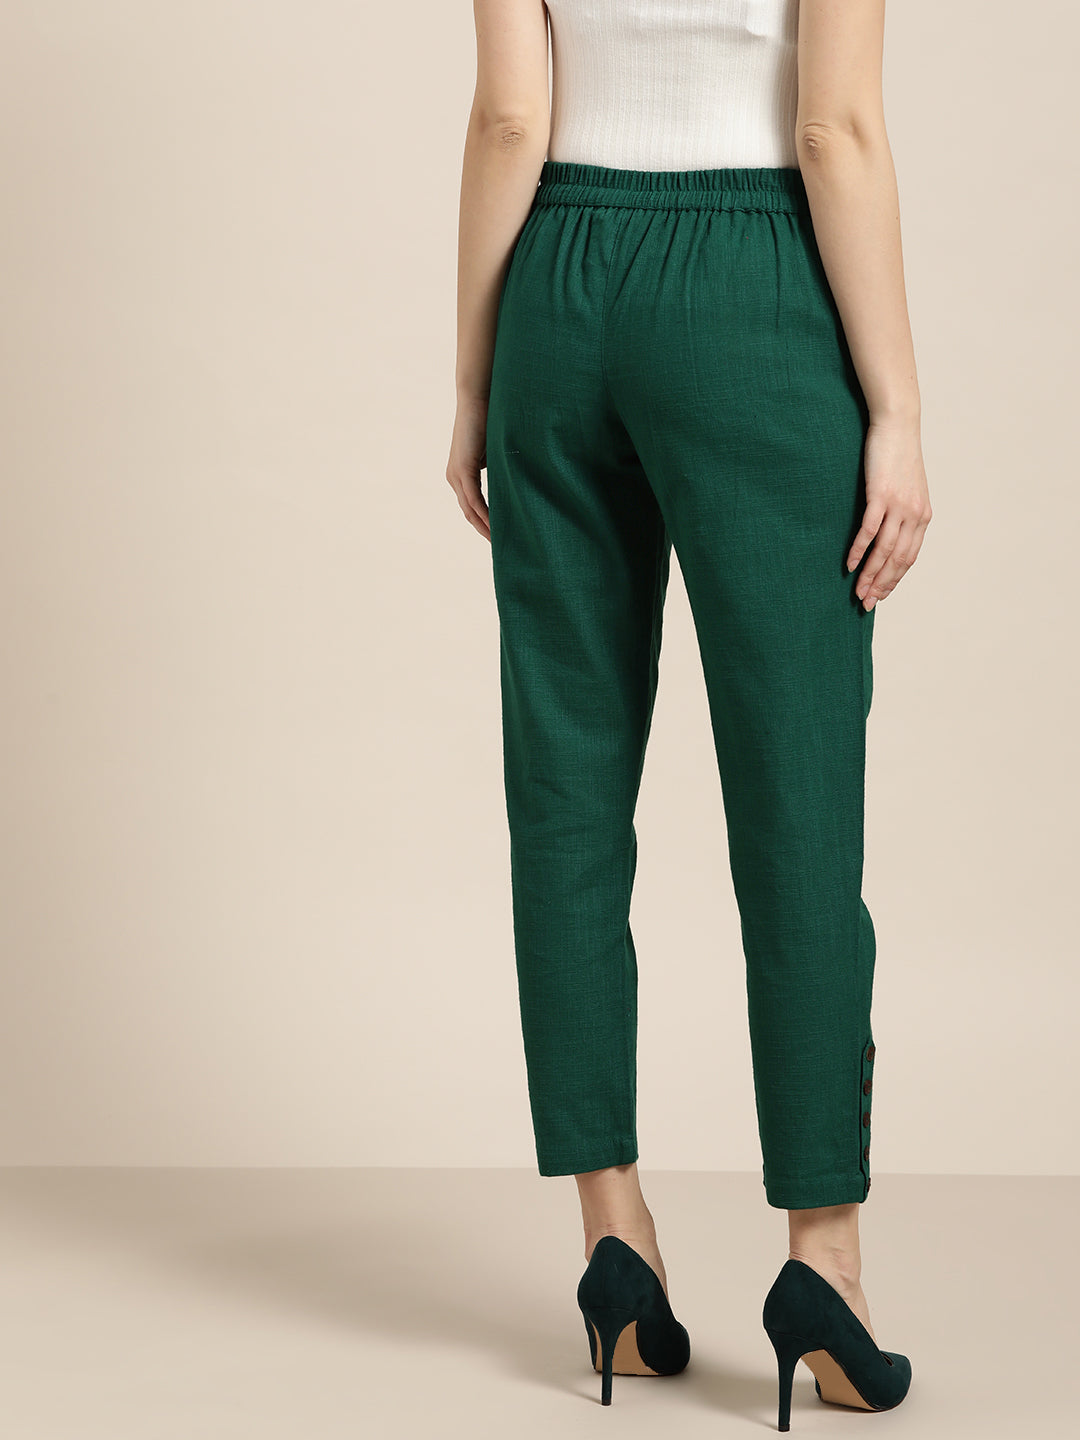 Buy Ankle length Pants for women